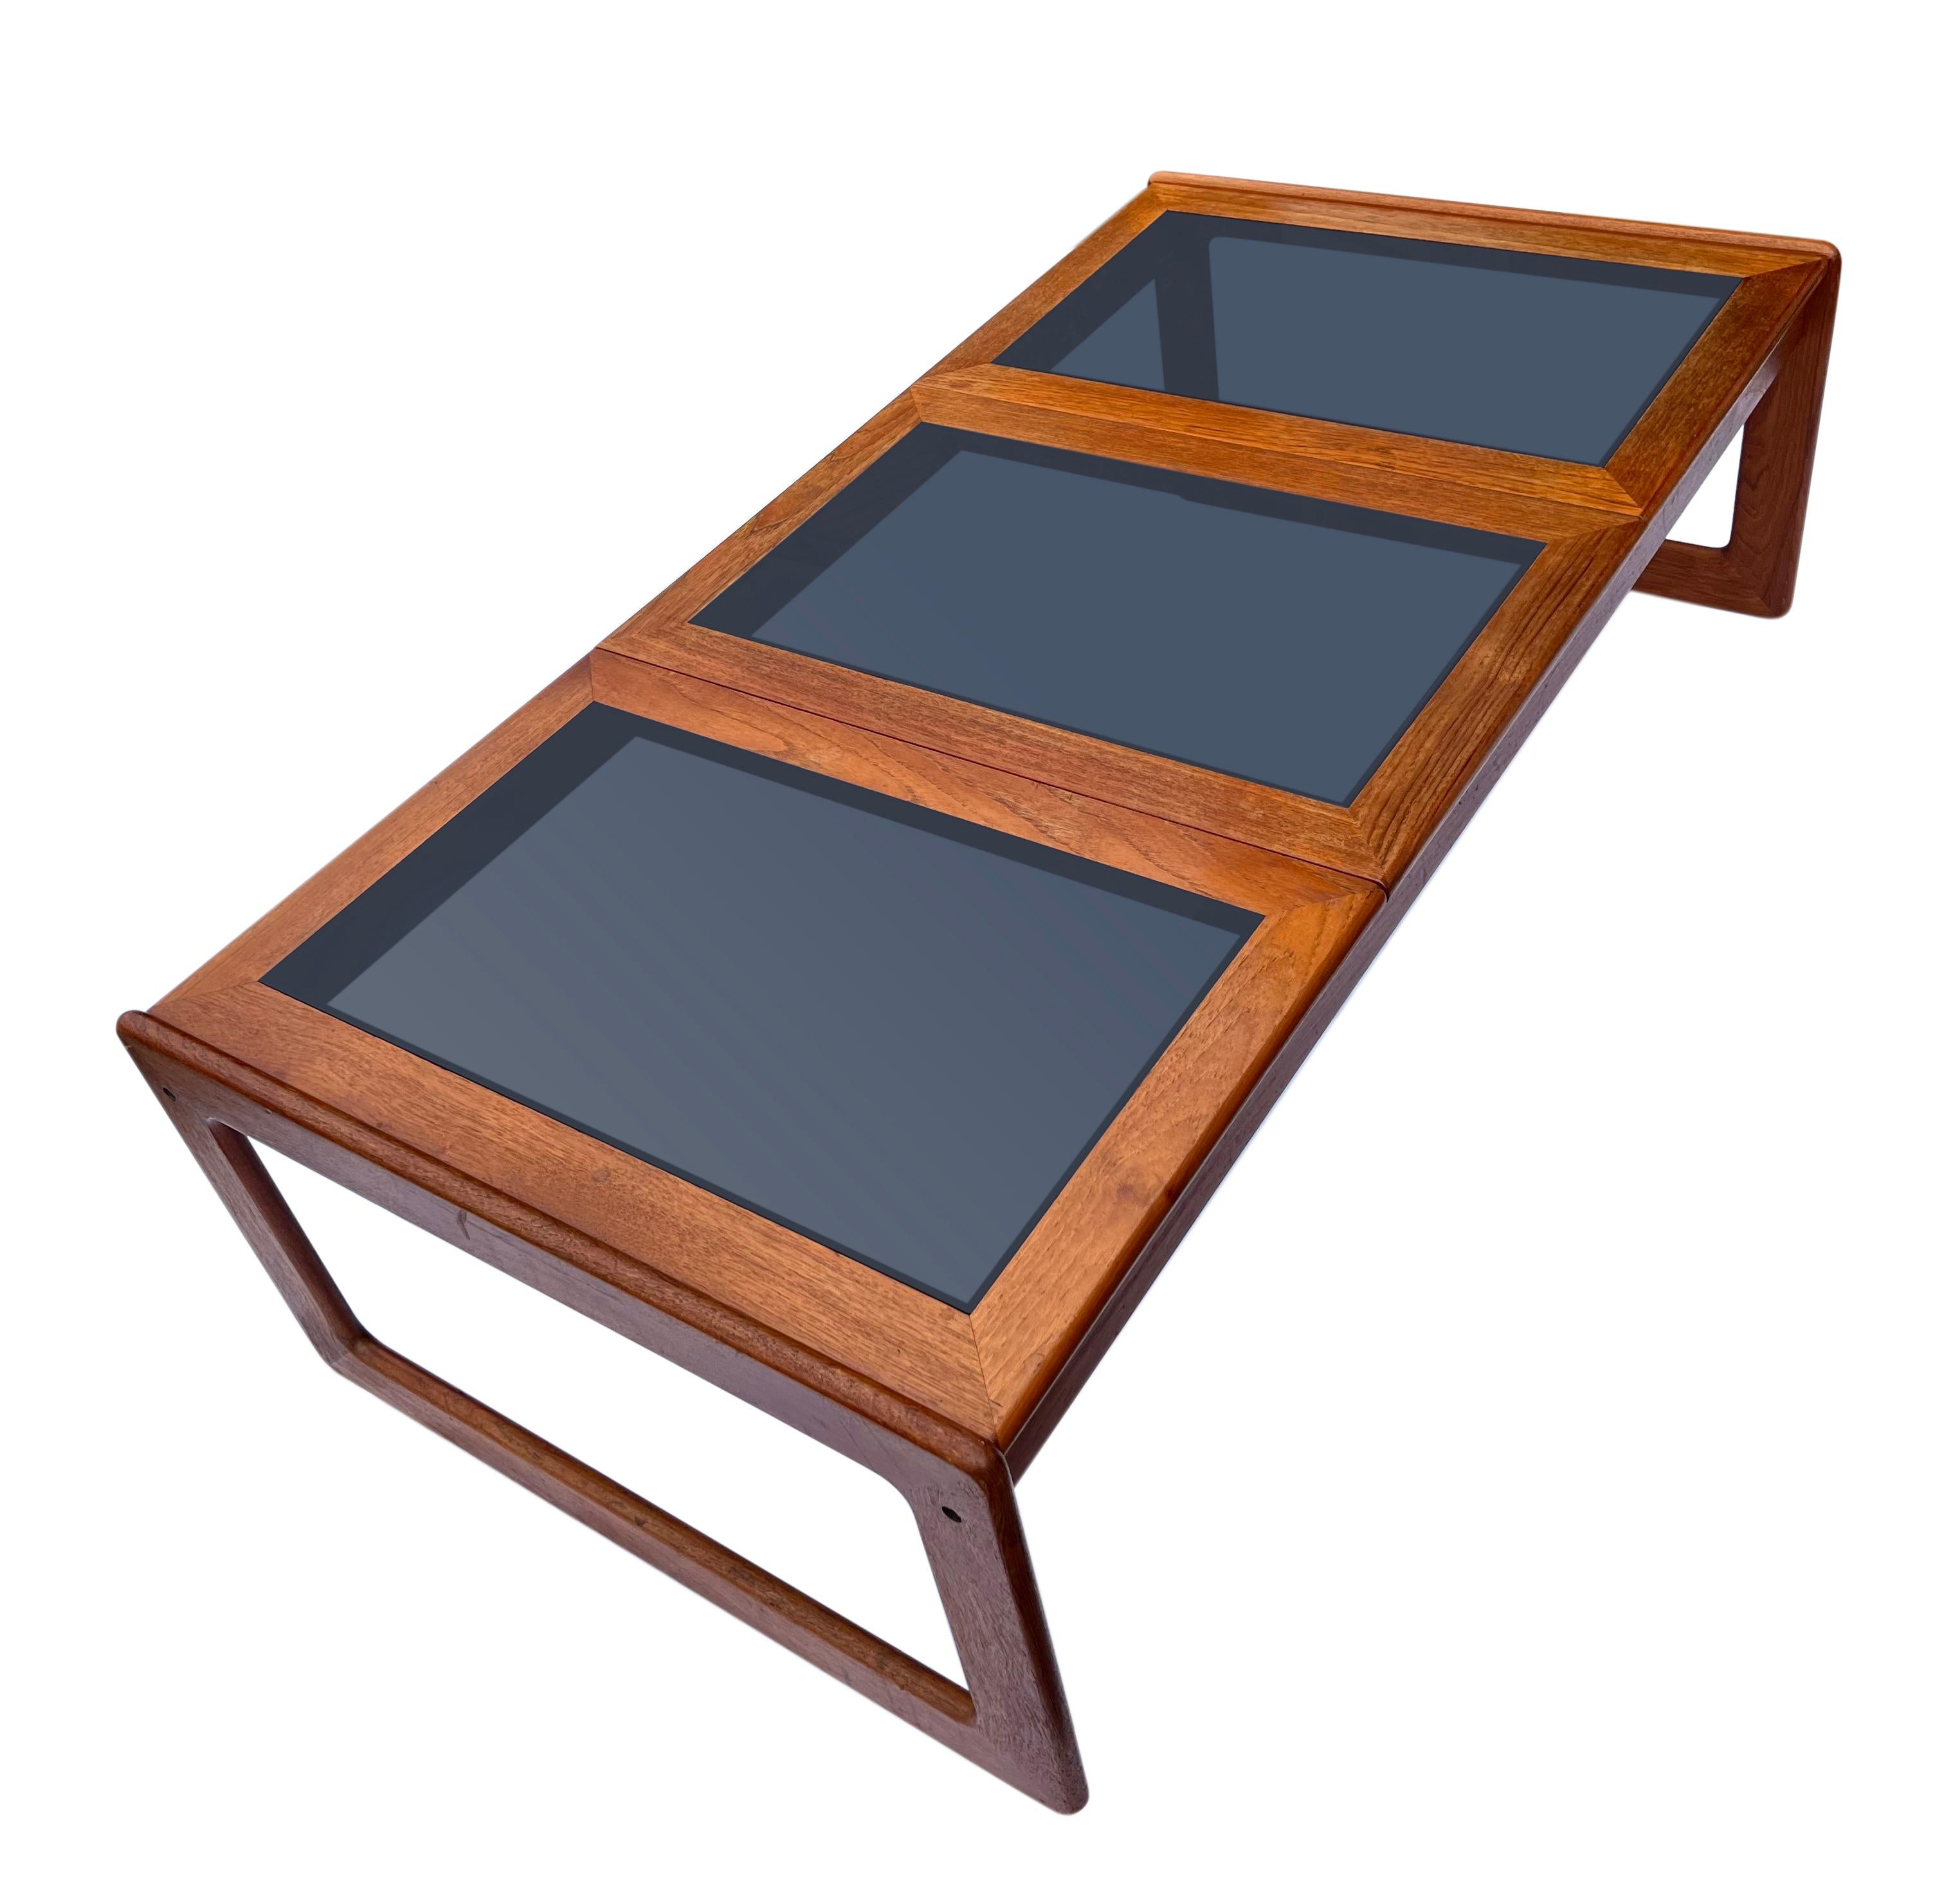 Exceptional mid century Danish teak coffee table with smoked glass by Komfort, made in Denmark. 

This impressive table features three large smoked glass insert panels. The teak has been well cared for and has maintained its original beauty.